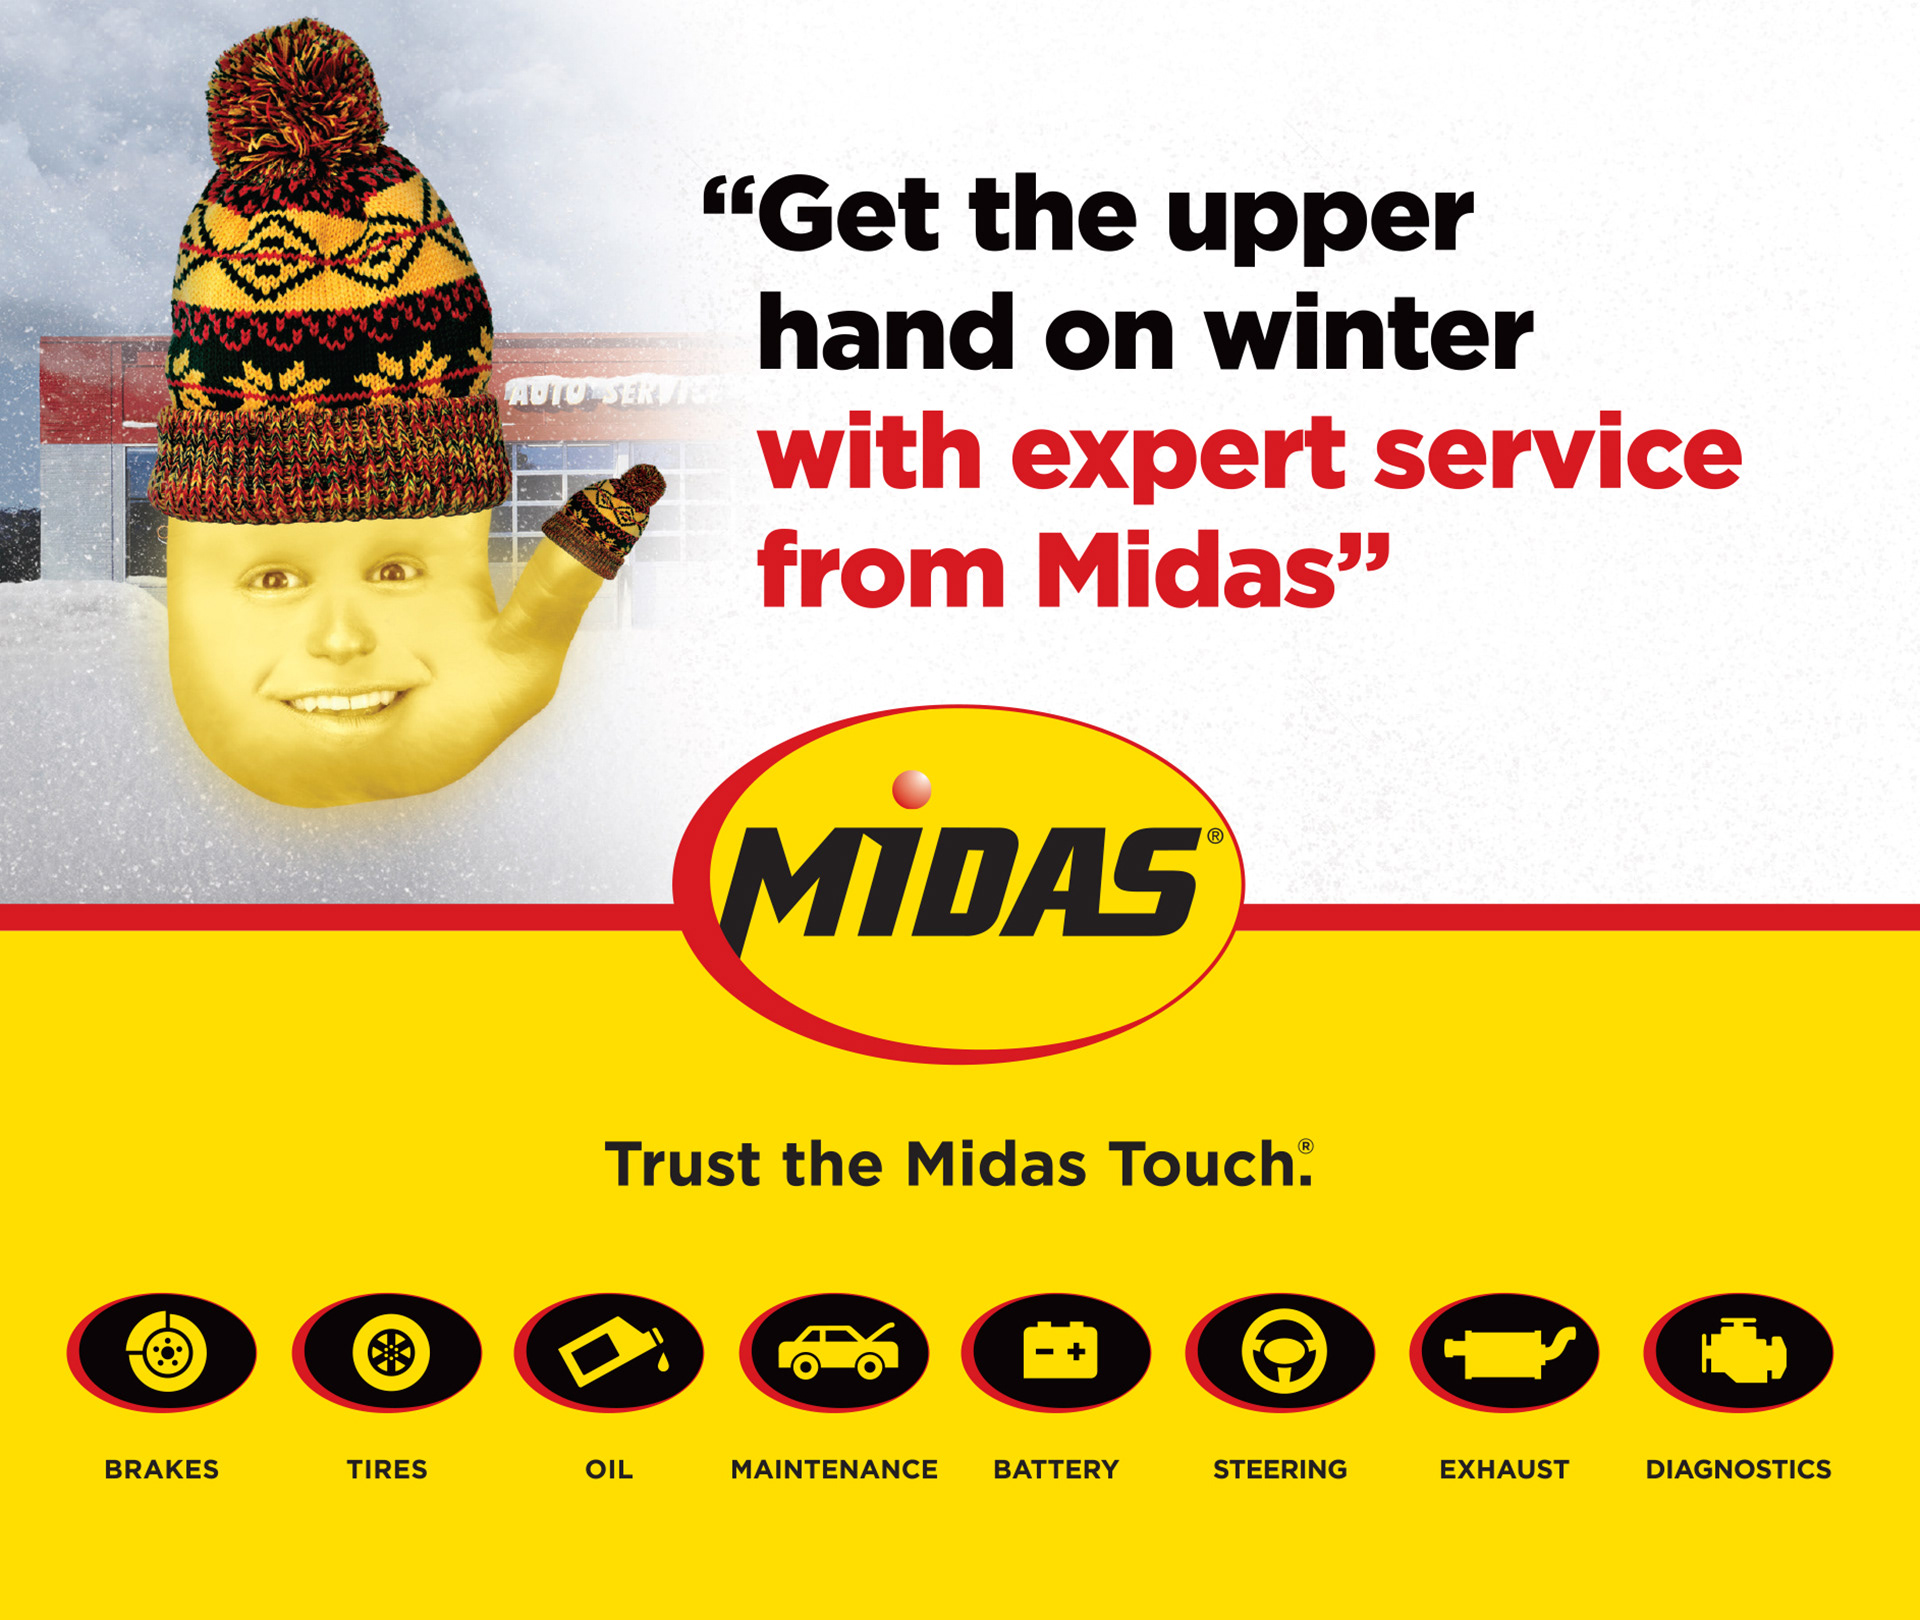 Trust the Midas Touch!